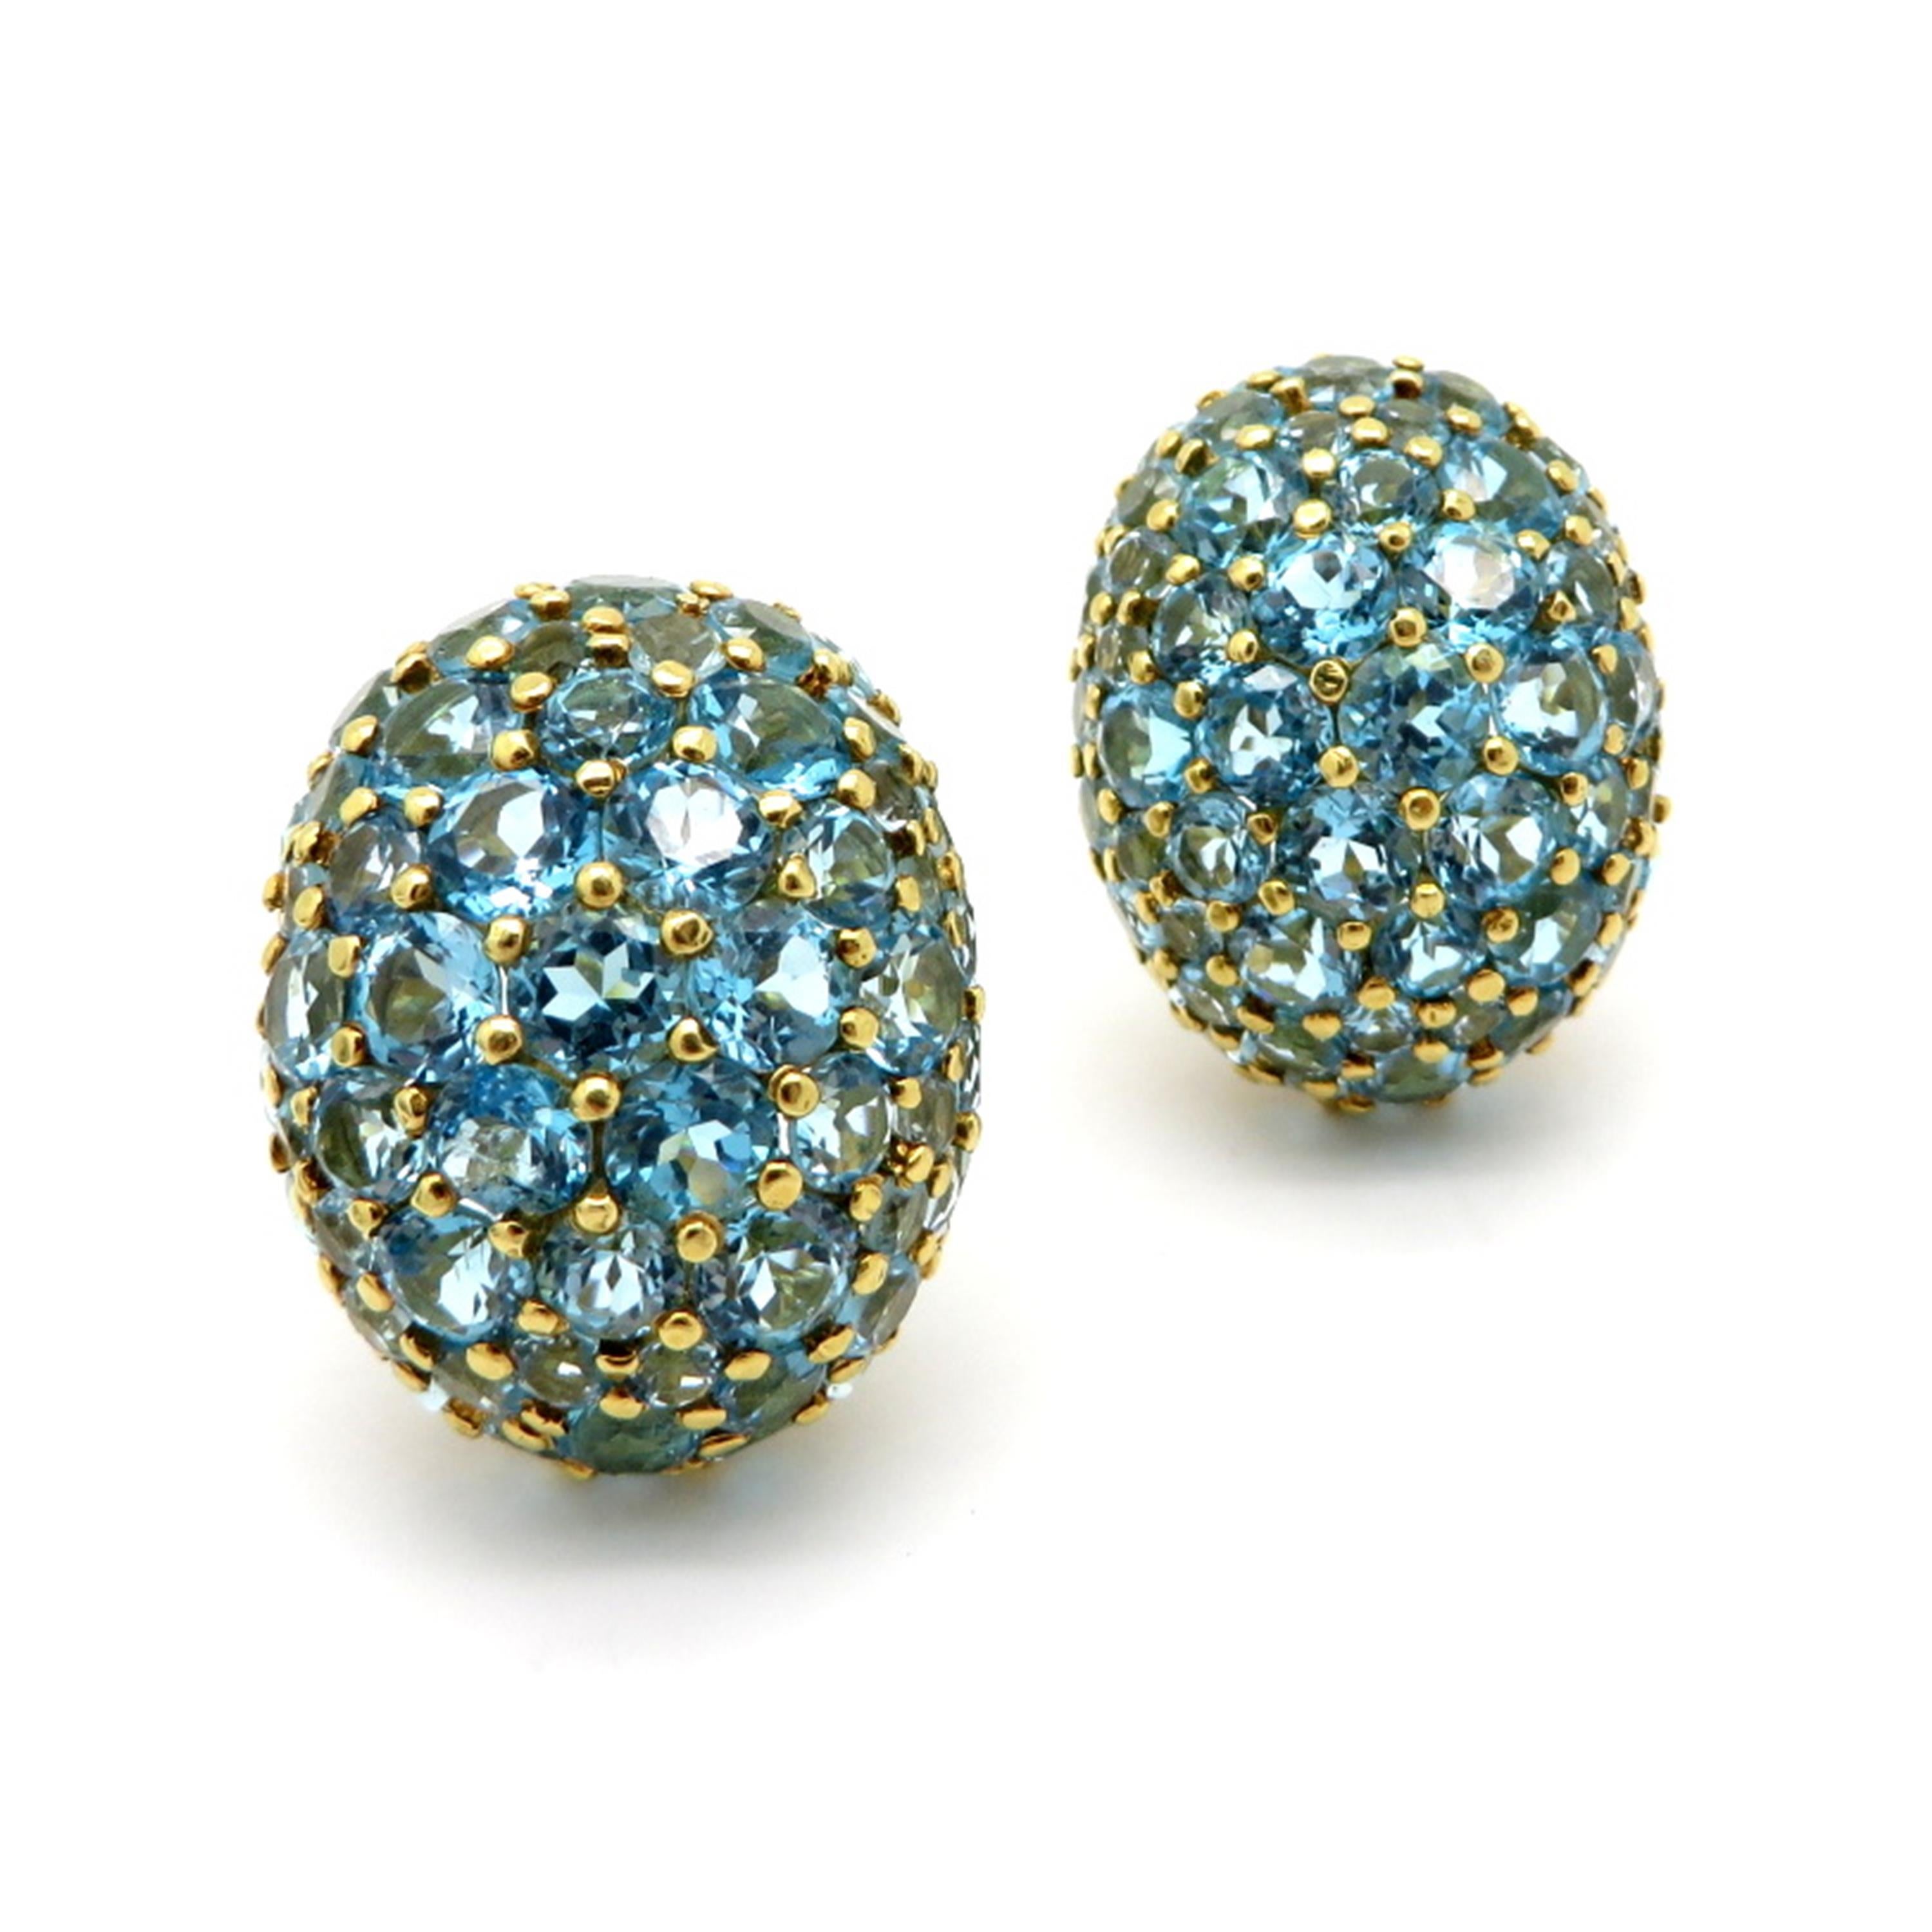 Estate 18K yellow gold sky blue topaz oval cluster 18K yellow gold clip on earrings. Featuring numerous round brilliant cut sky blue topaz gemstones, in a pave design weighing approximately 10.00 carats total. The earrings are secured with clip on